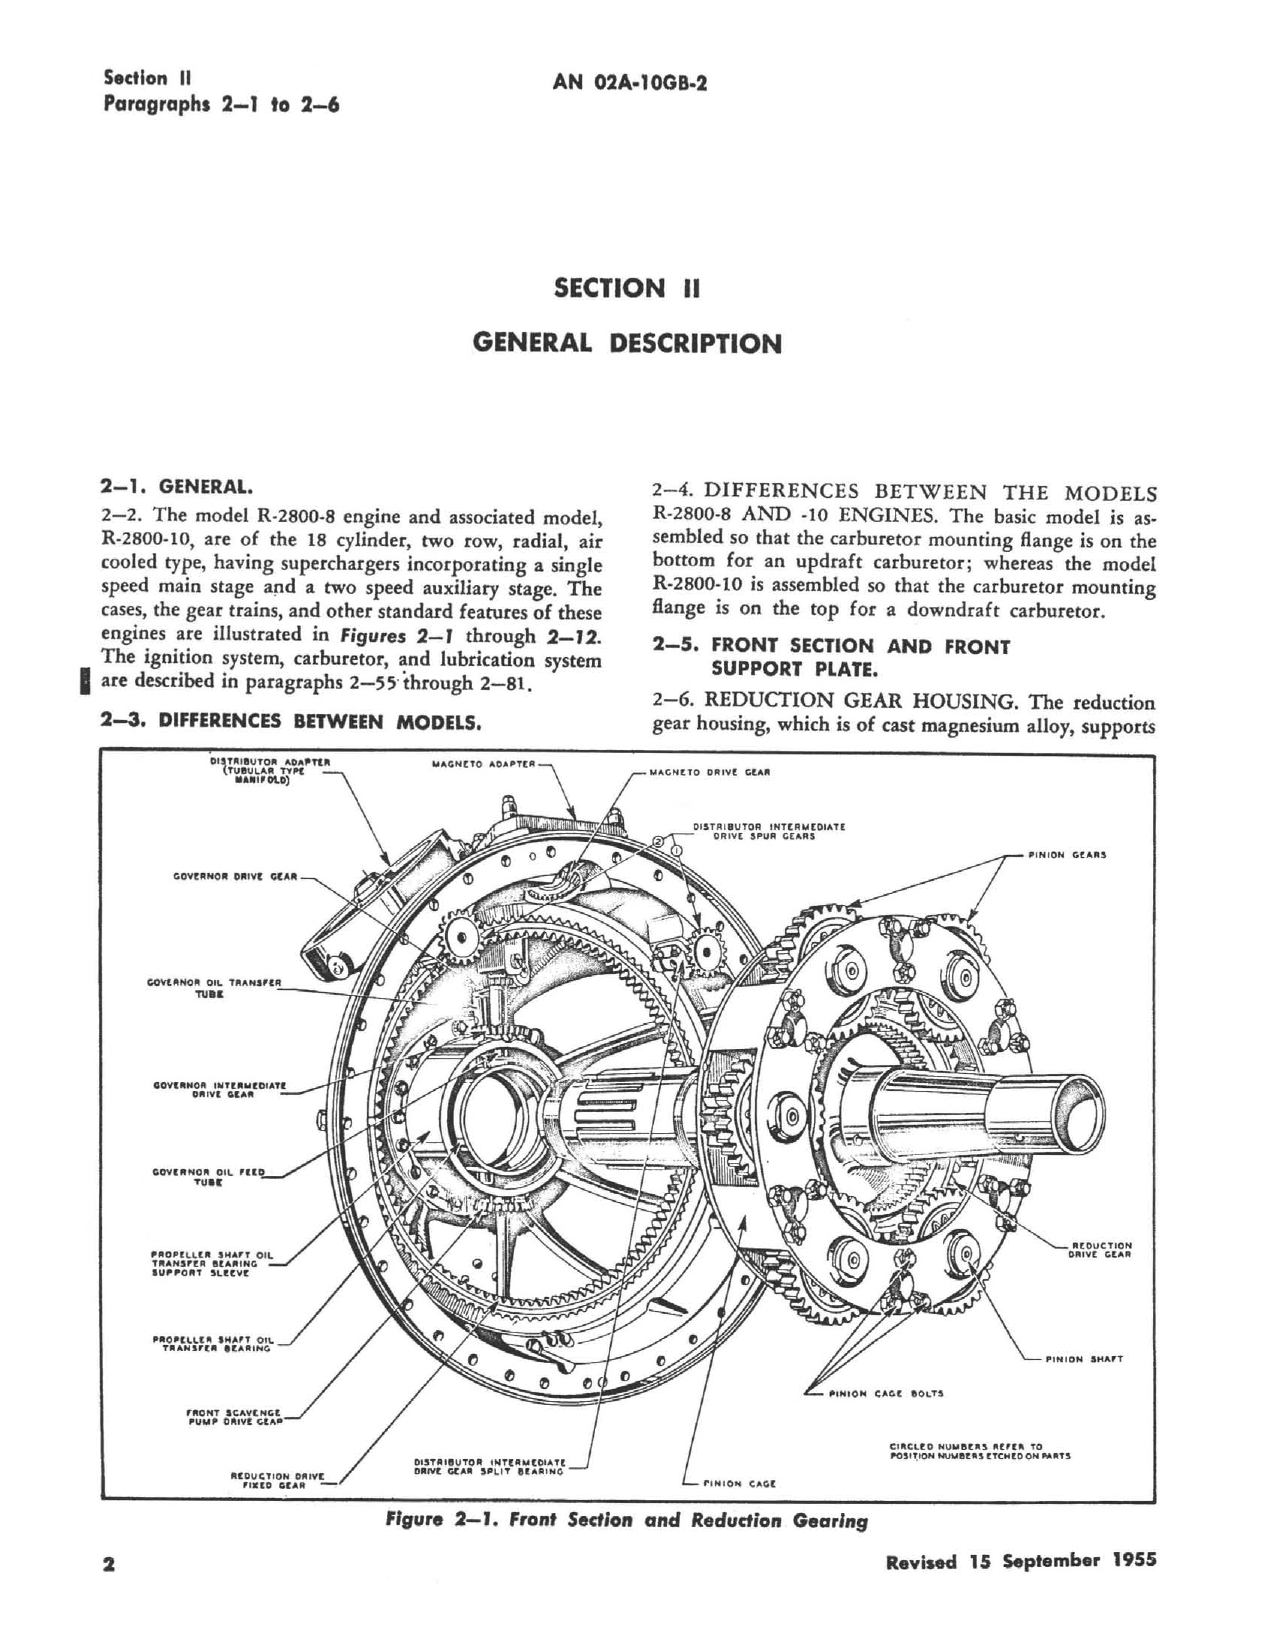 Sample page 10 from AirCorps Library document: Handbook Service Instructions for Models R-2800-8 and -10 Engines